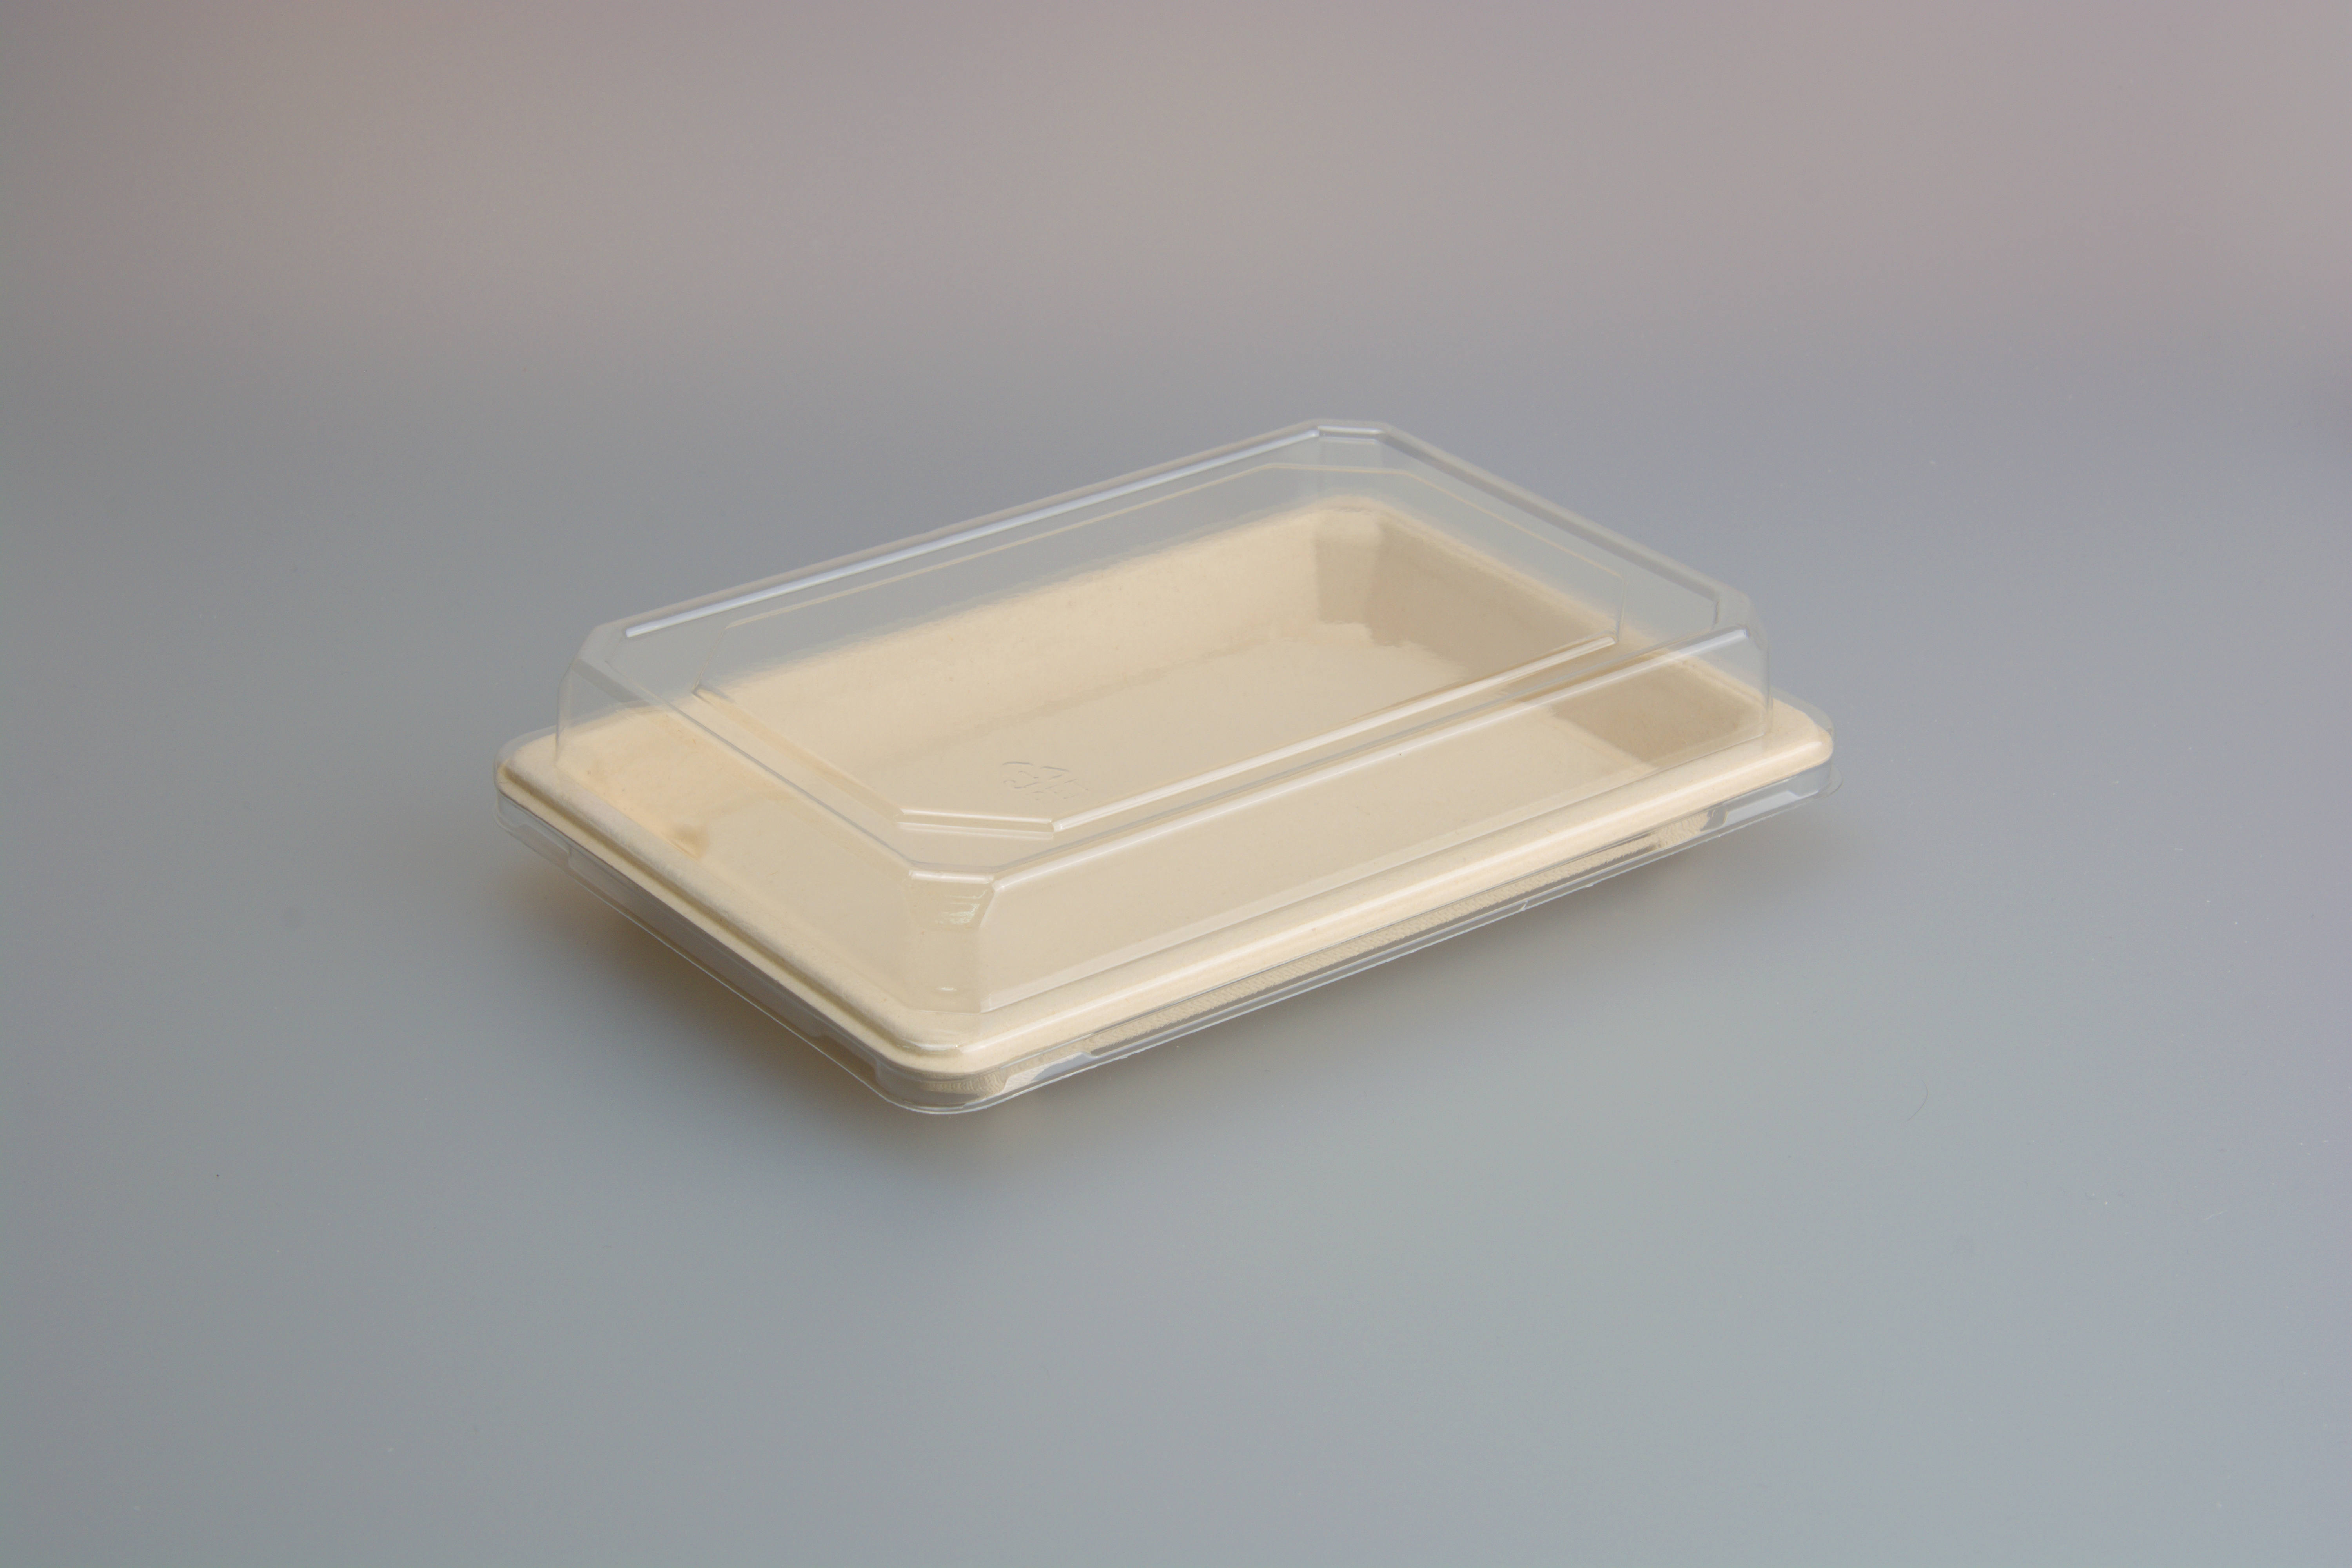 Fixed Competitive Price Compostable Serving Tray - 7.3*5.0 INCH Sushi Trays, Disposable Sushi Containers With Lids – Short, Take Out Containers For Appetizers, Entrees, or Desserts, Black Pl...